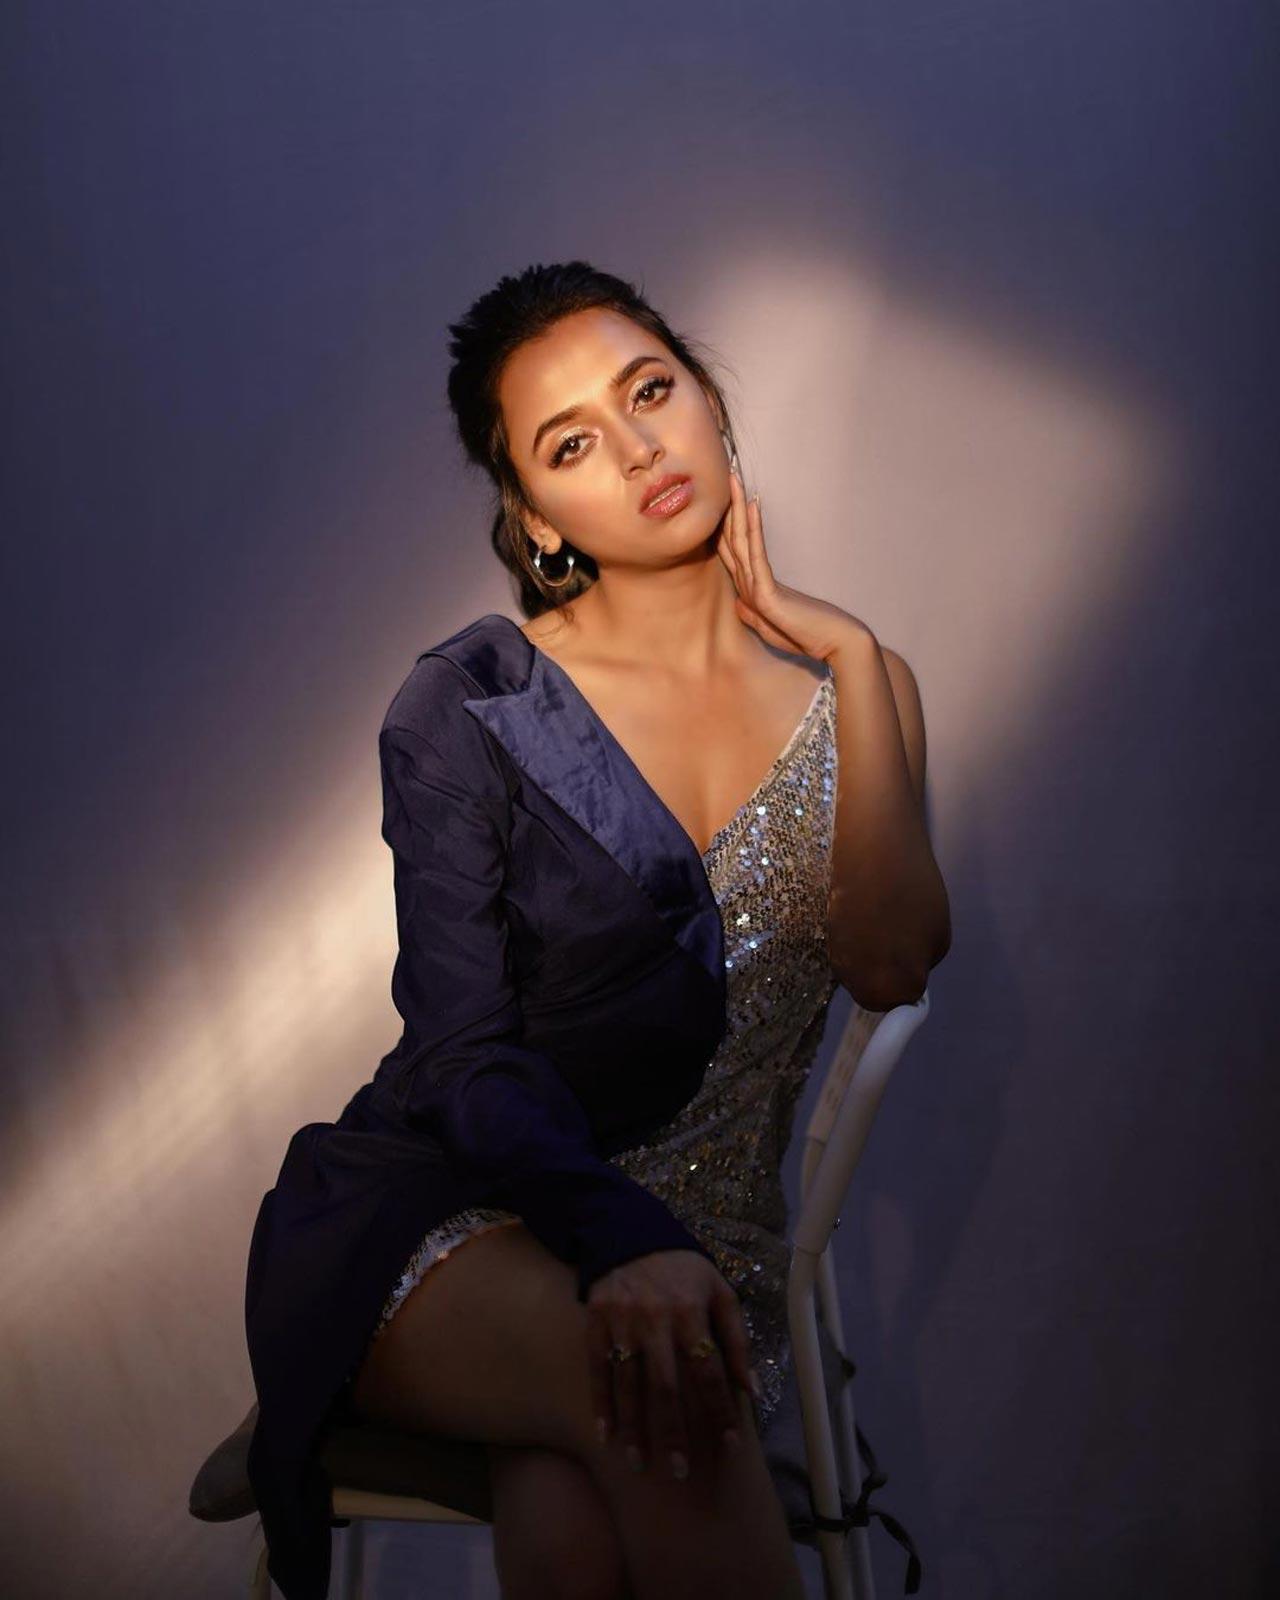 Tejasswi donned a silver shimmery bodycon dress that she paired with a black blazer on one side that stole the limelight. She accessorised her outfit with silver hoop earrings and styled her hair into a ponytail